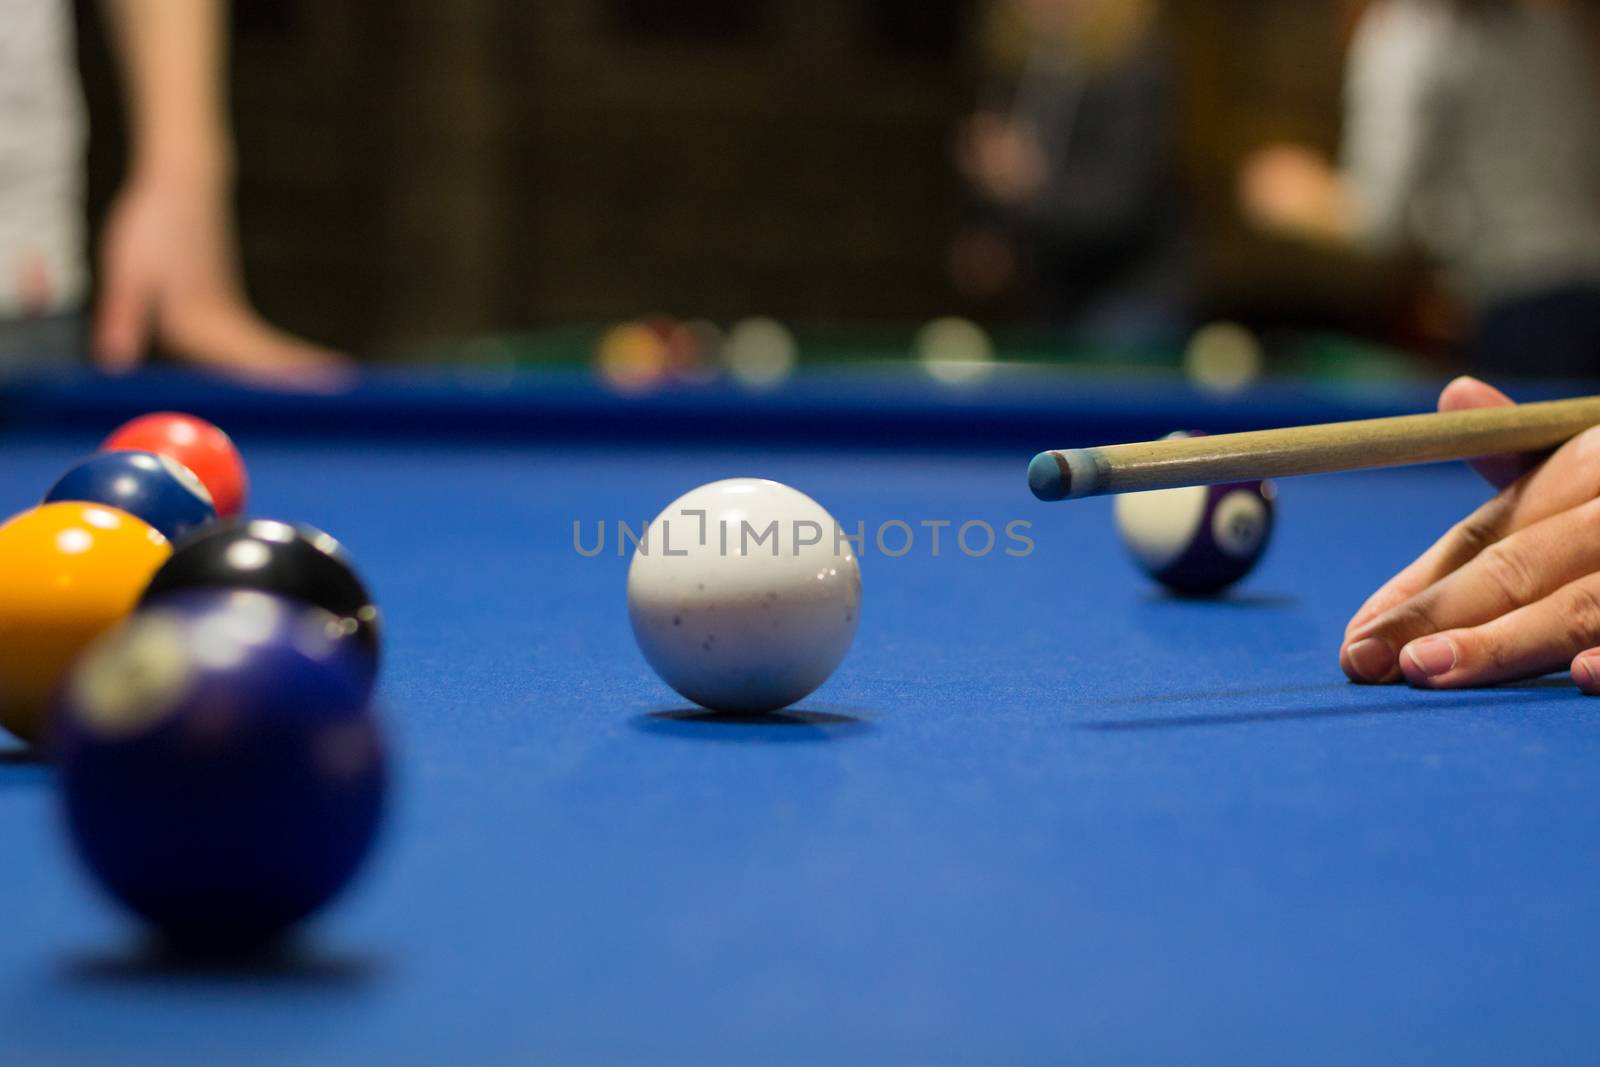 Billiard pool game player aims to shoot balls with cue by VeraVerano